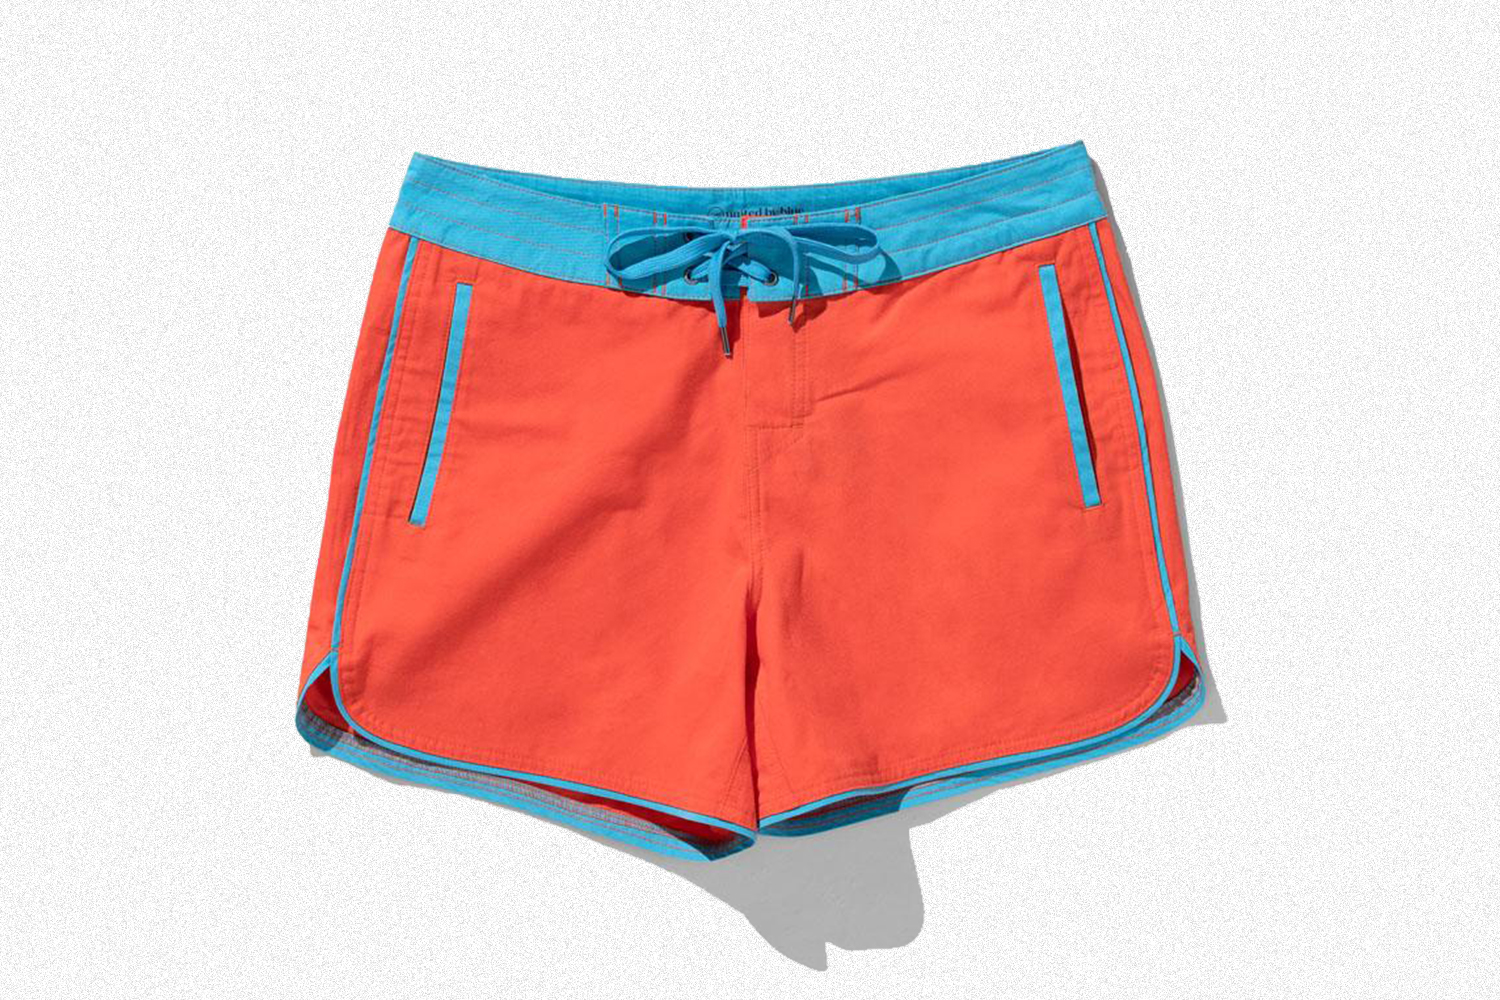 Organic Throwback Board Shorts from United by Blue in coral and blue 